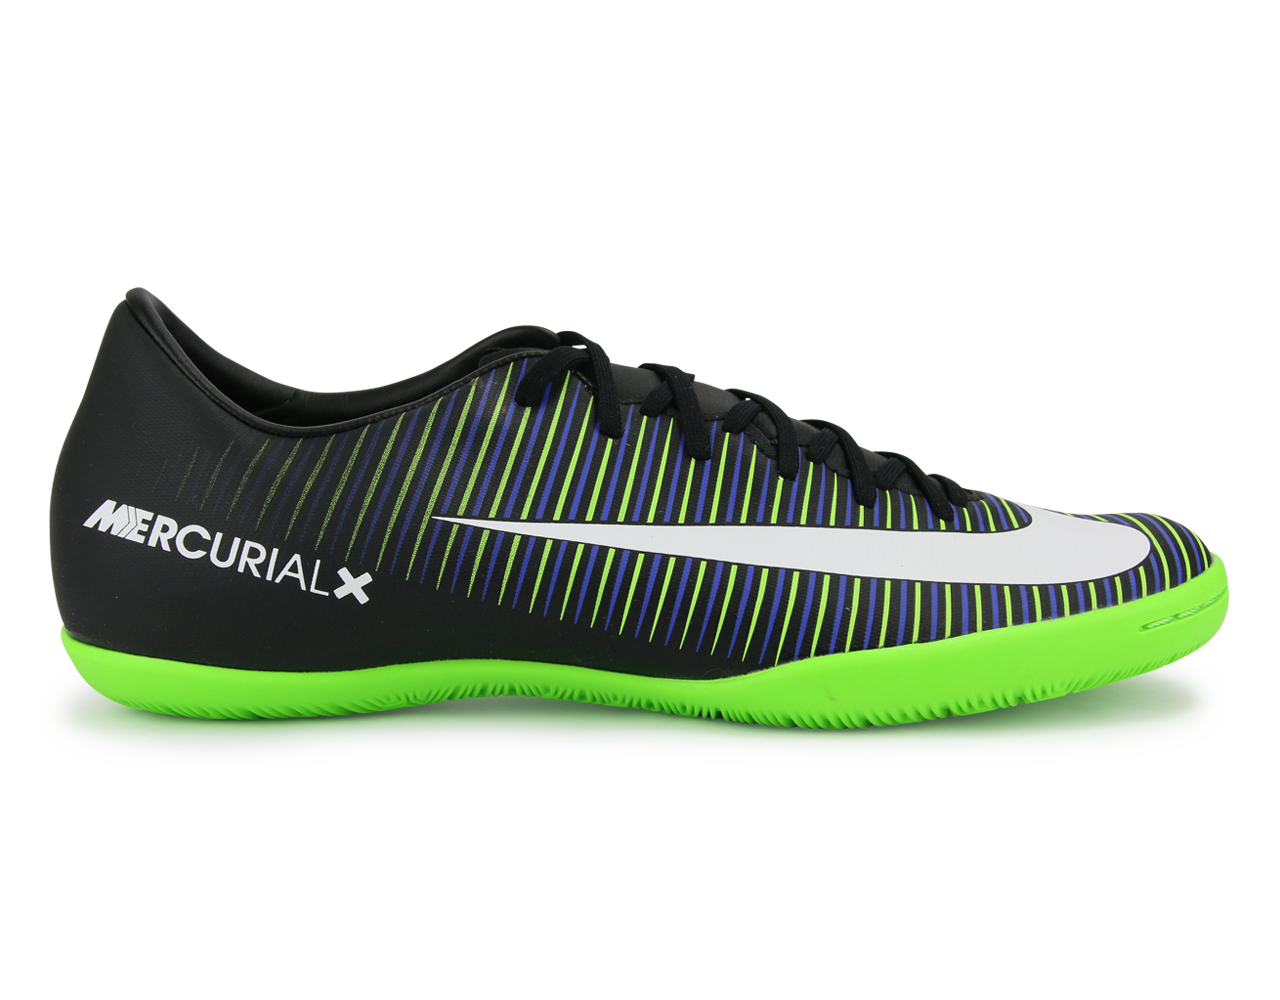 Nike Men's MercurialX Victory VI Indoor Shoes Black/White/Electric Green